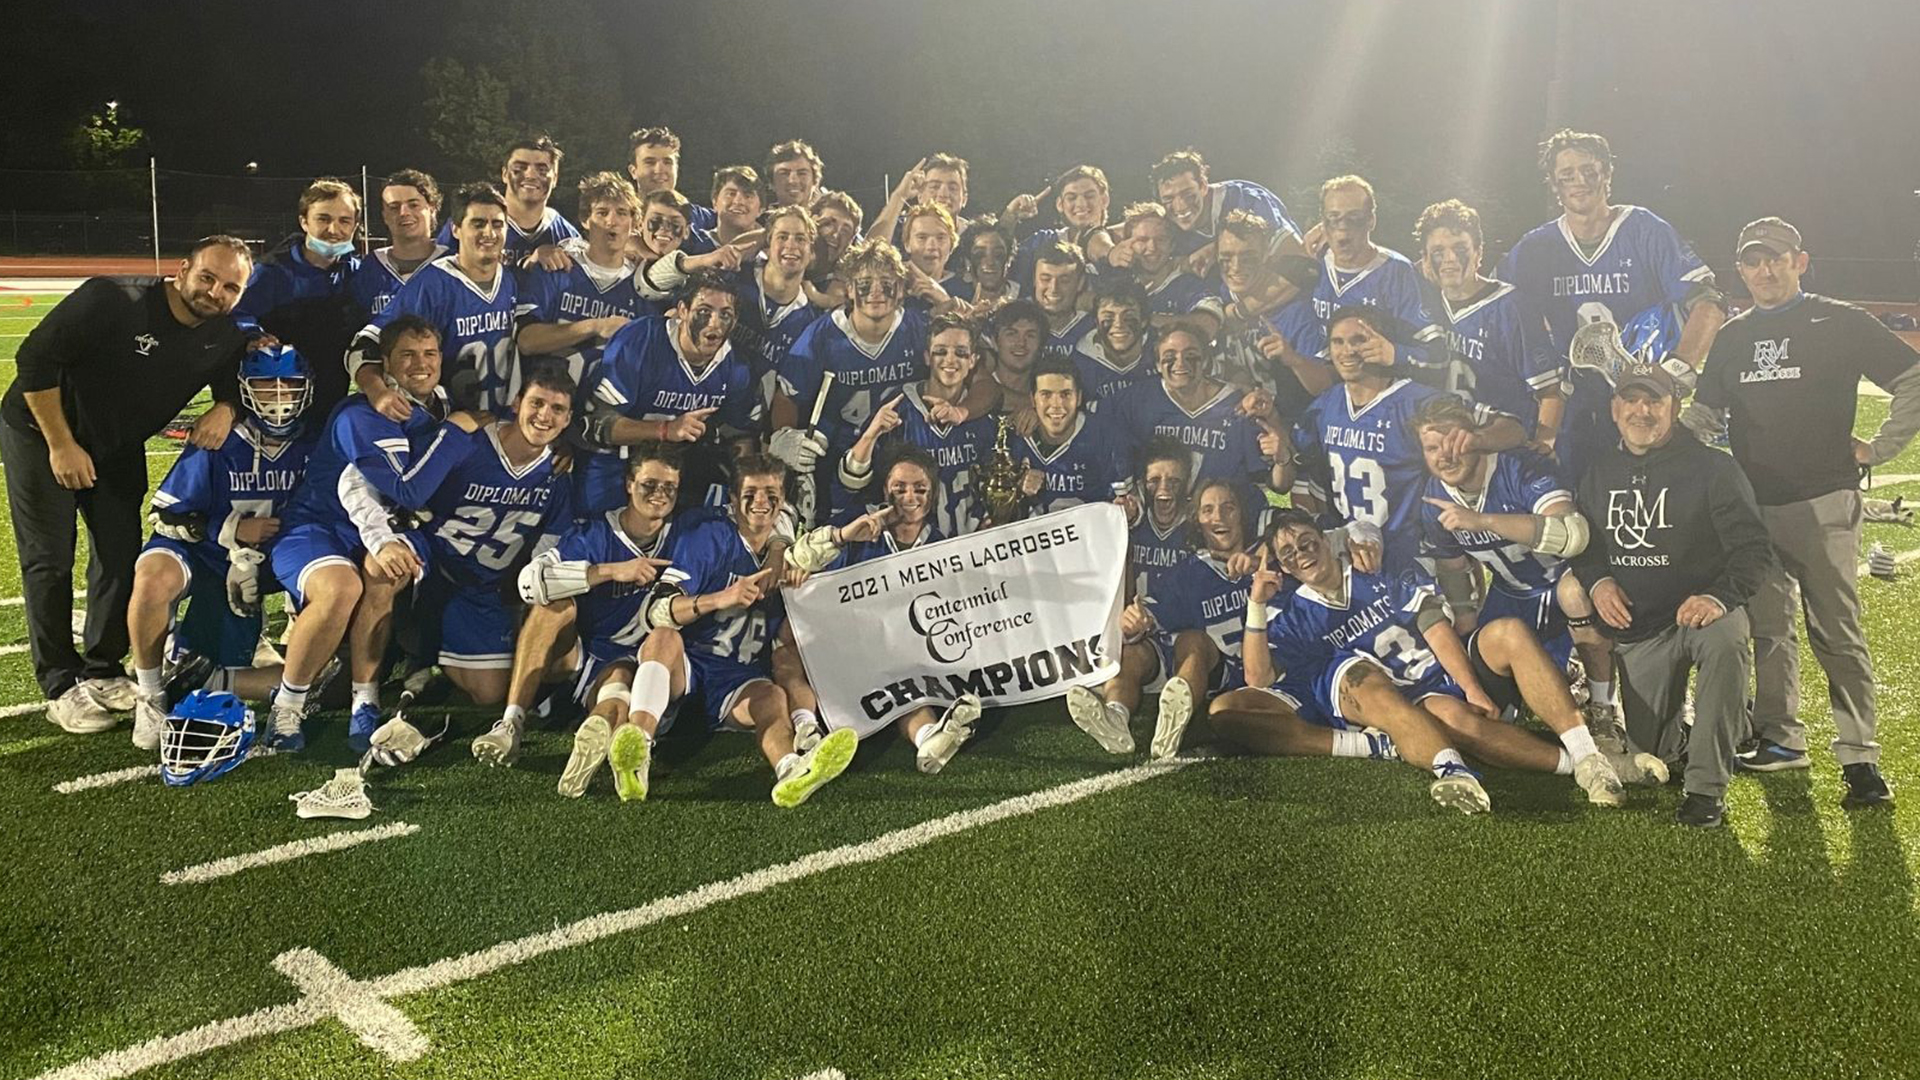 Franklin & Marshall Claims Centennial Men's Lacrosse Title